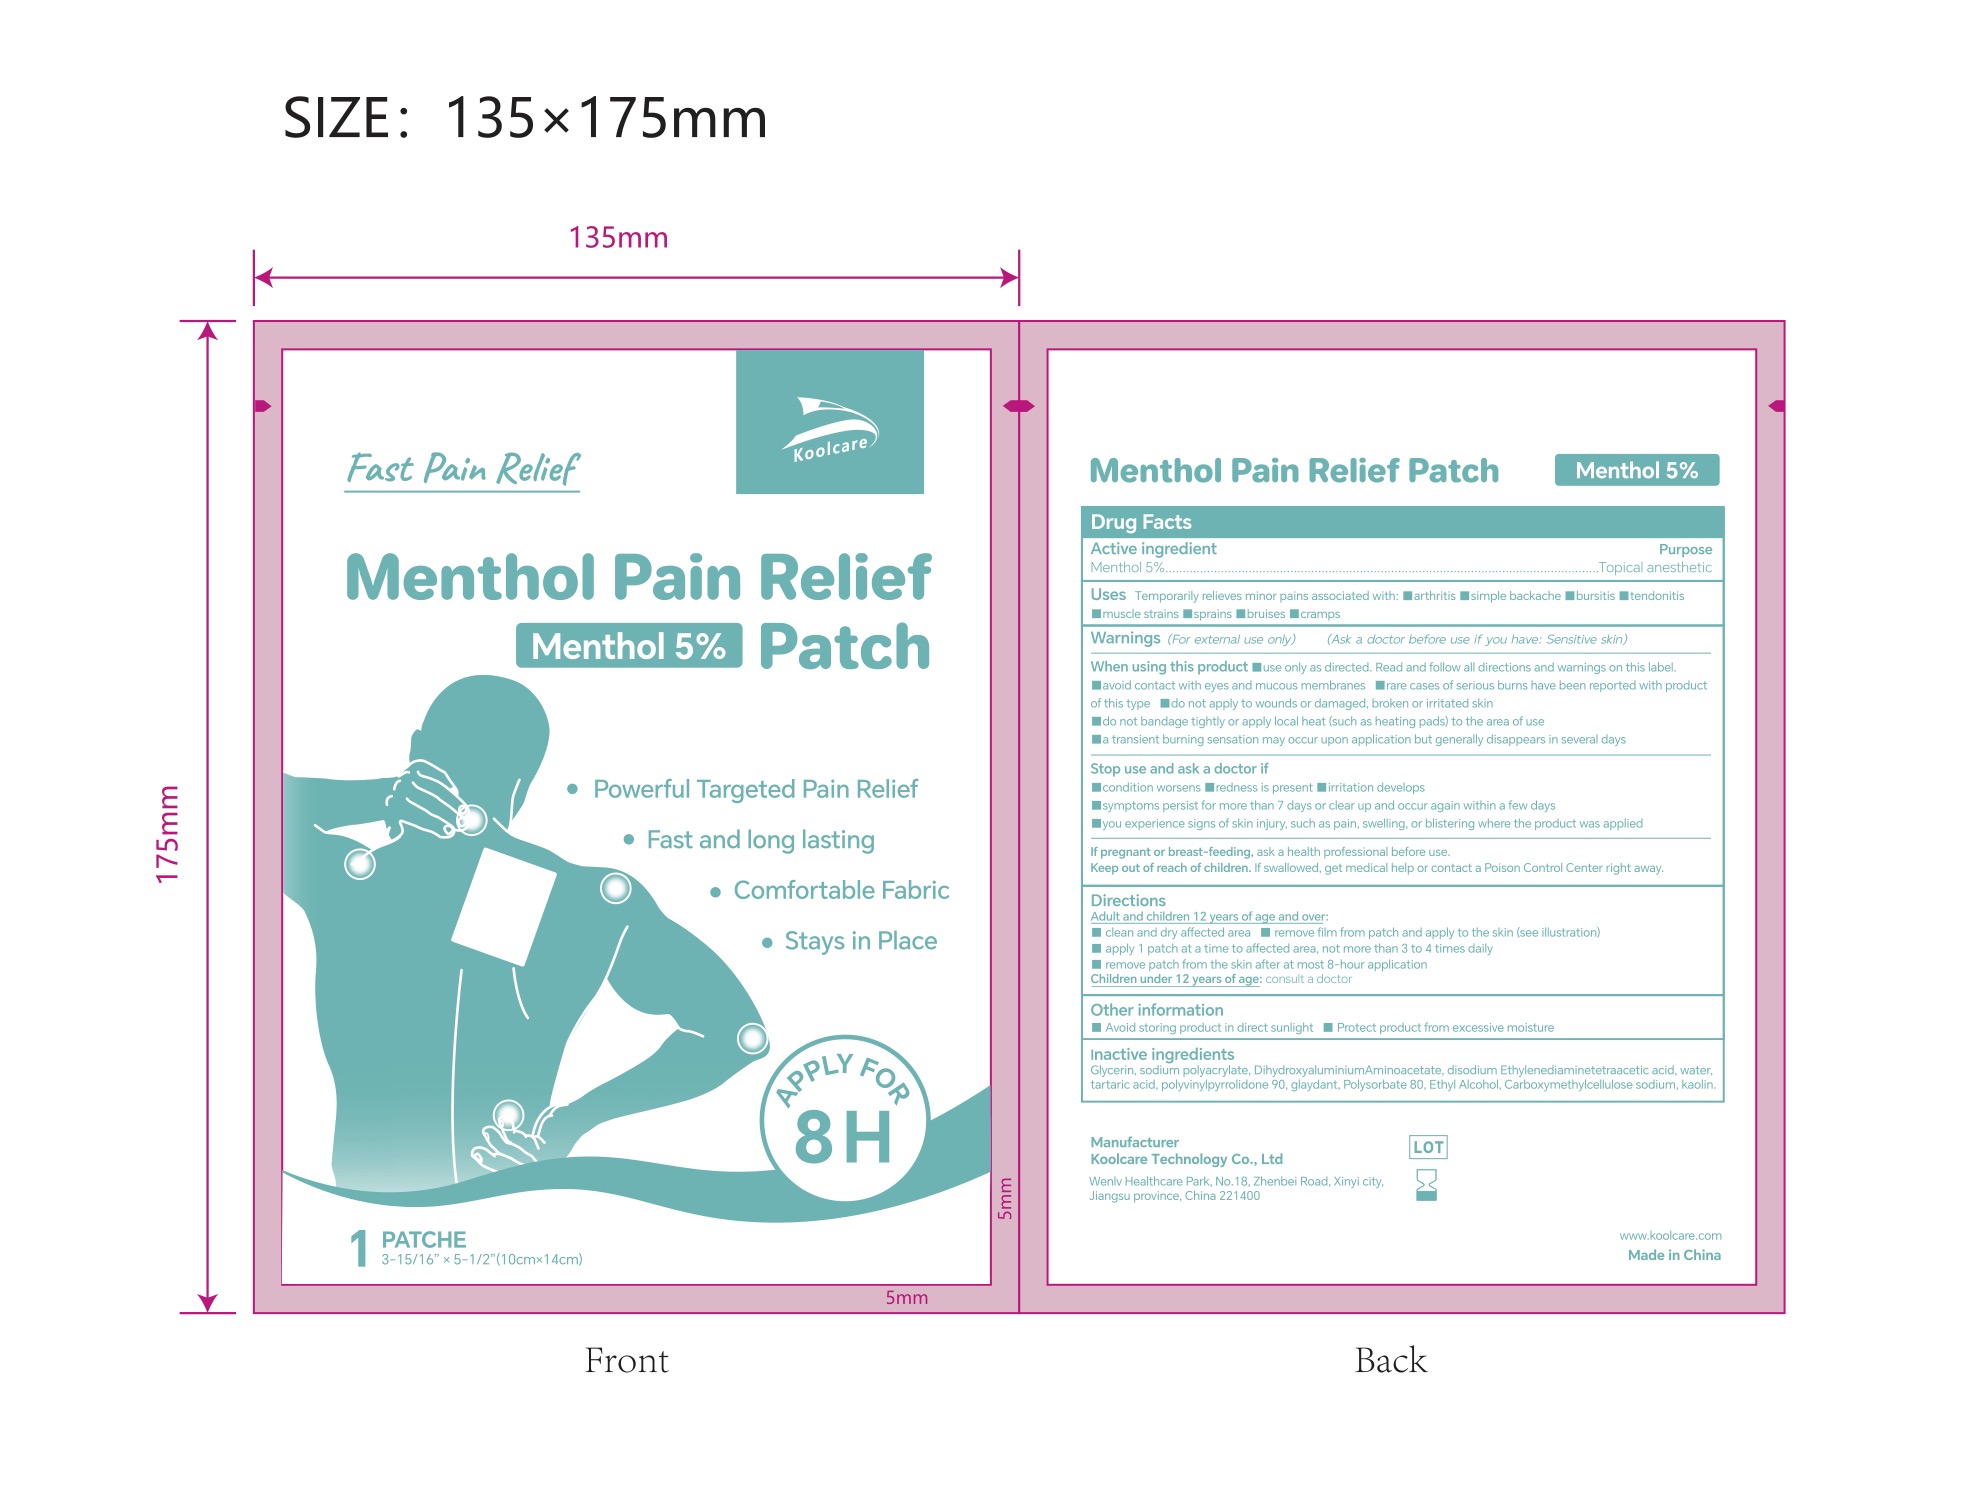 5% Menthol Pain Relief Patch NDC: 84205-004-00